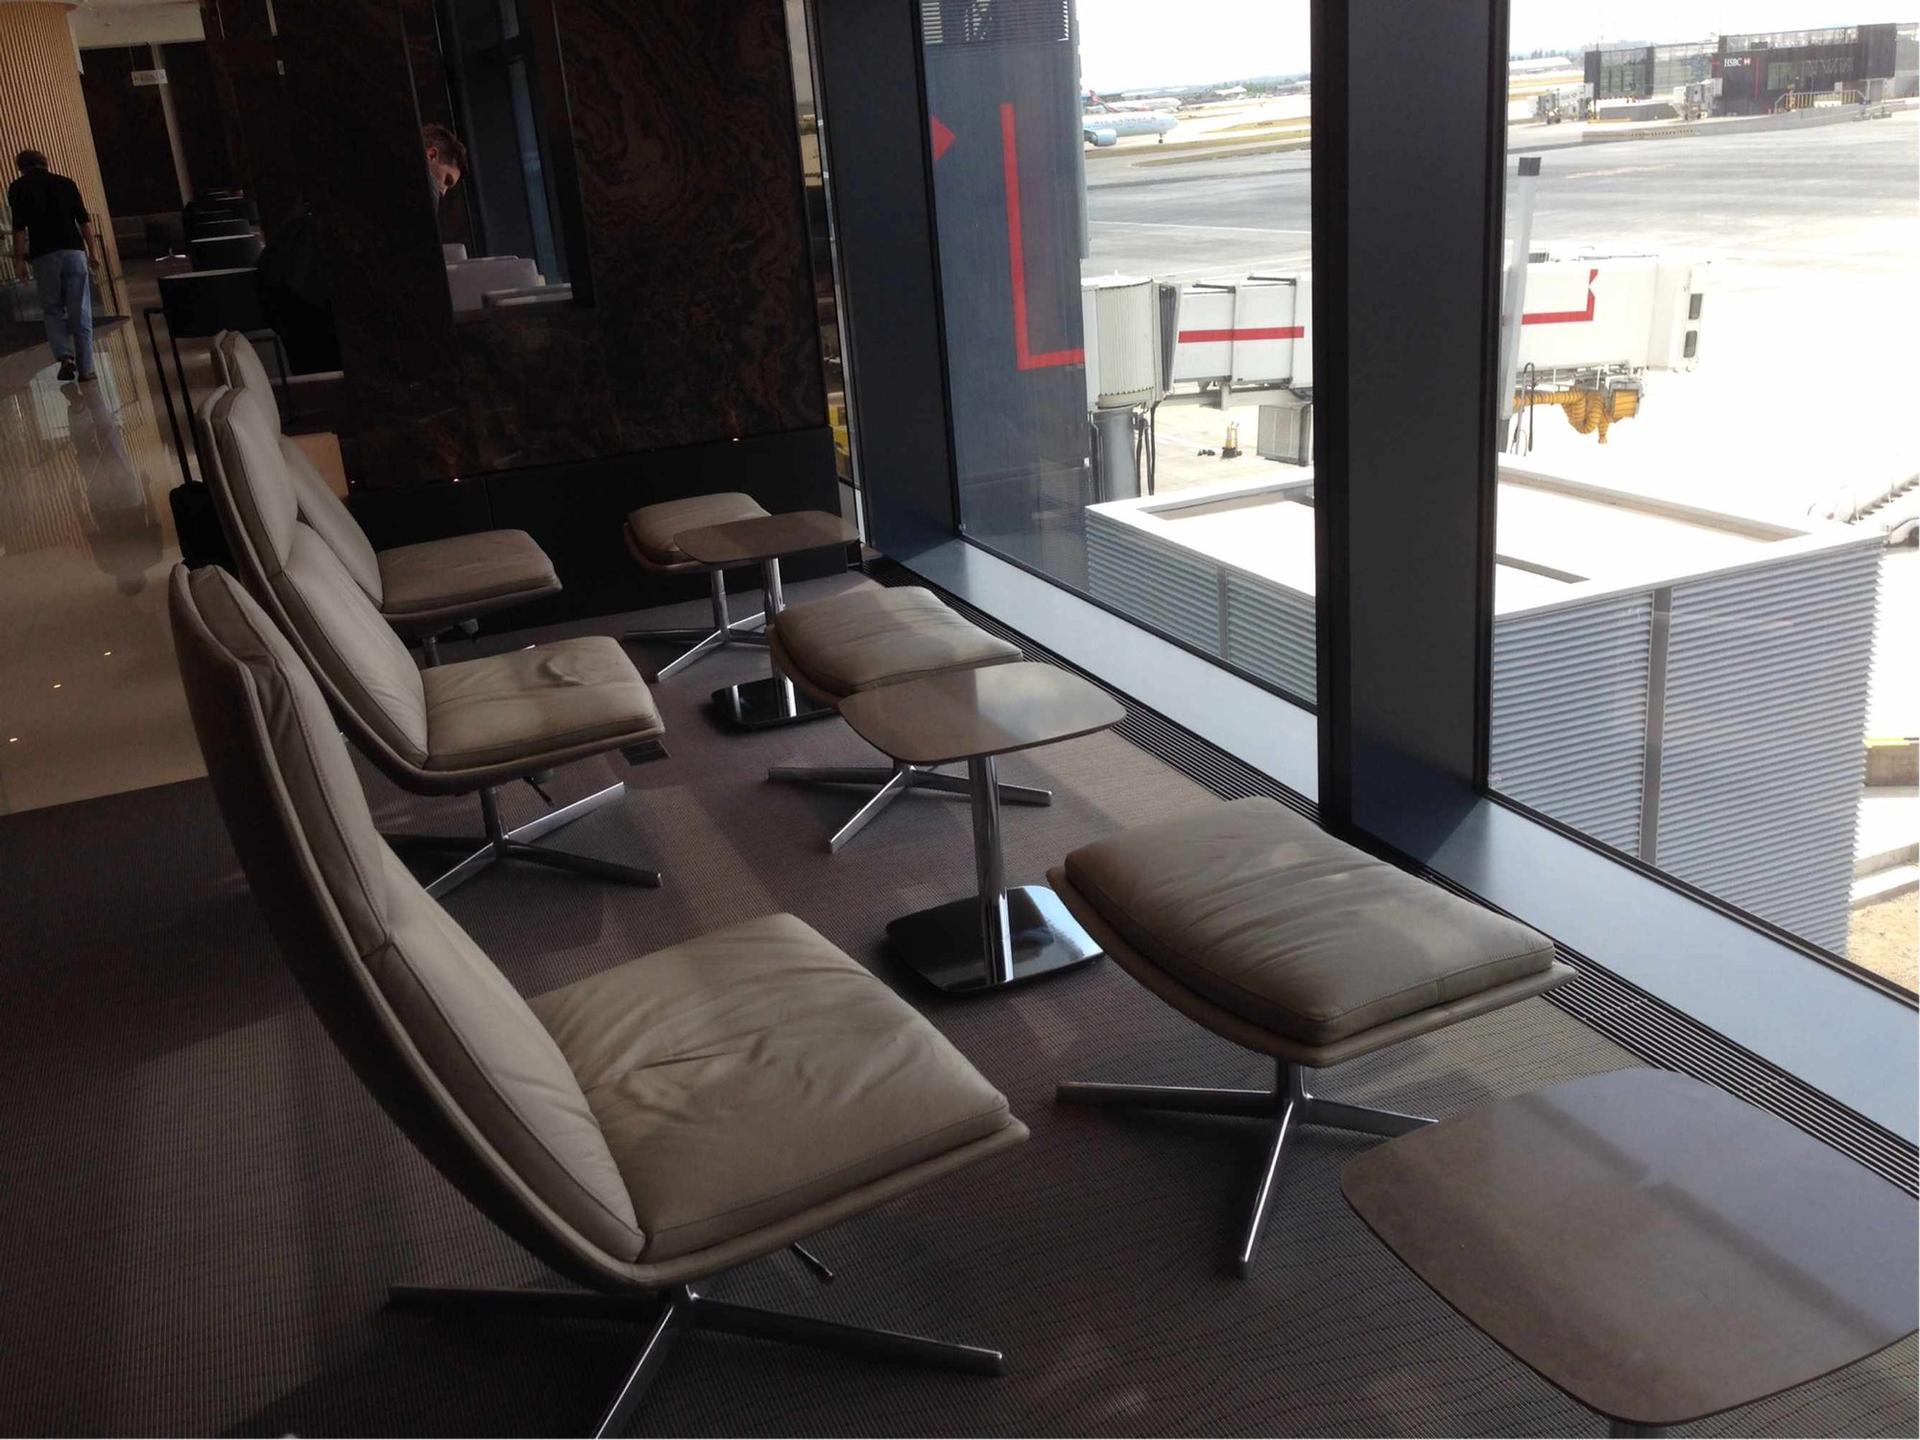 Air Canada Maple Leaf Lounge image 7 of 27